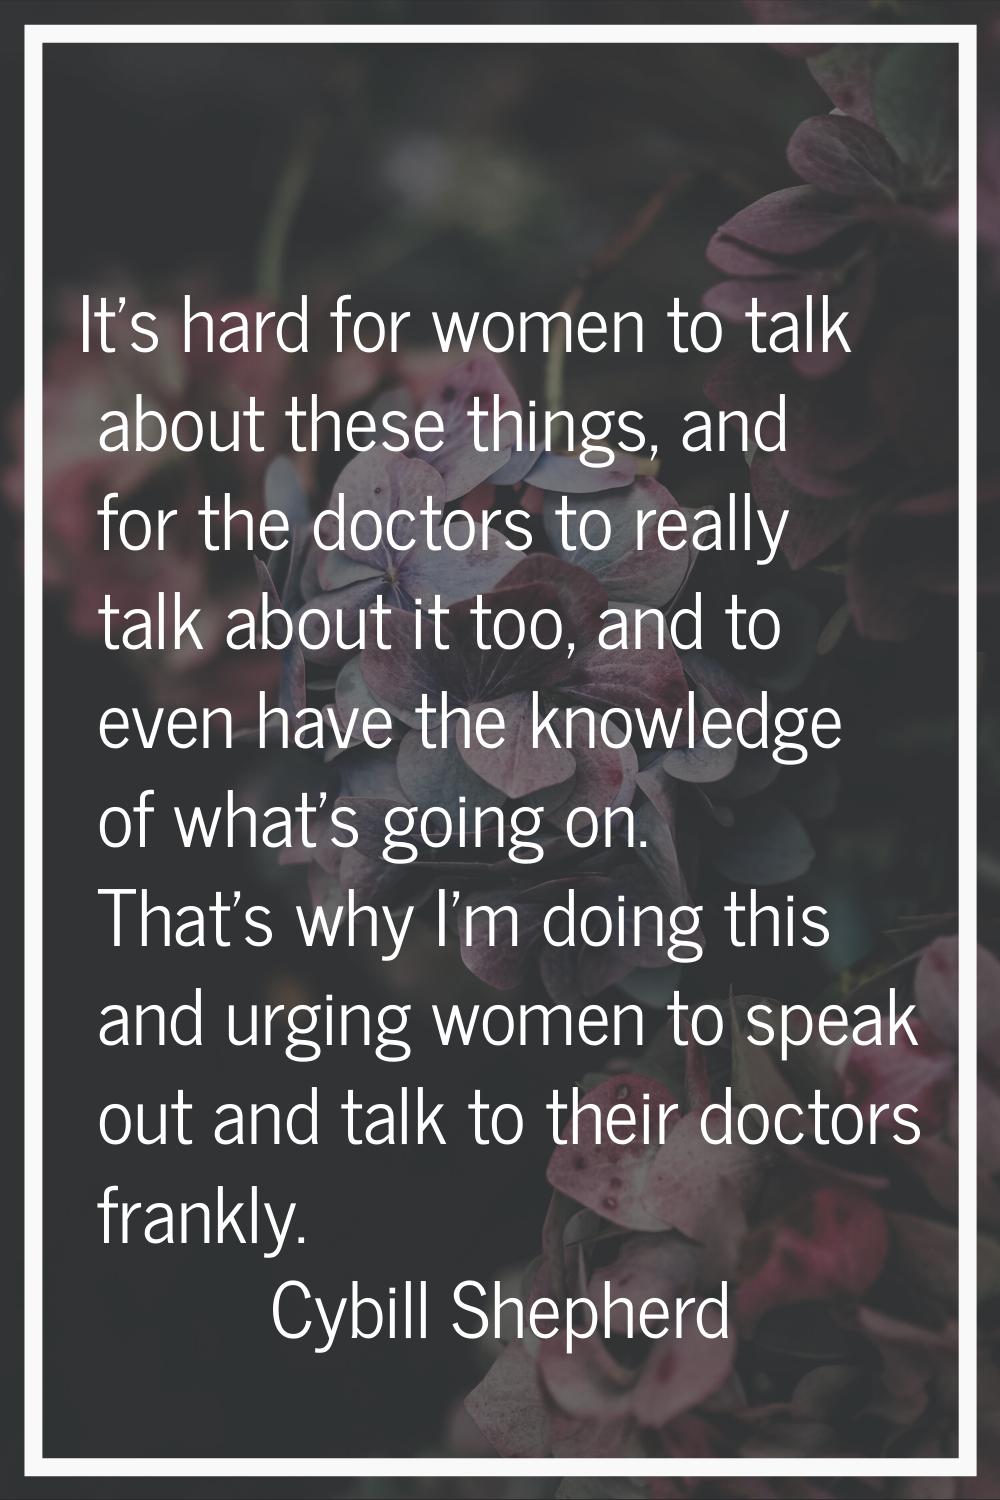 It's hard for women to talk about these things, and for the doctors to really talk about it too, an